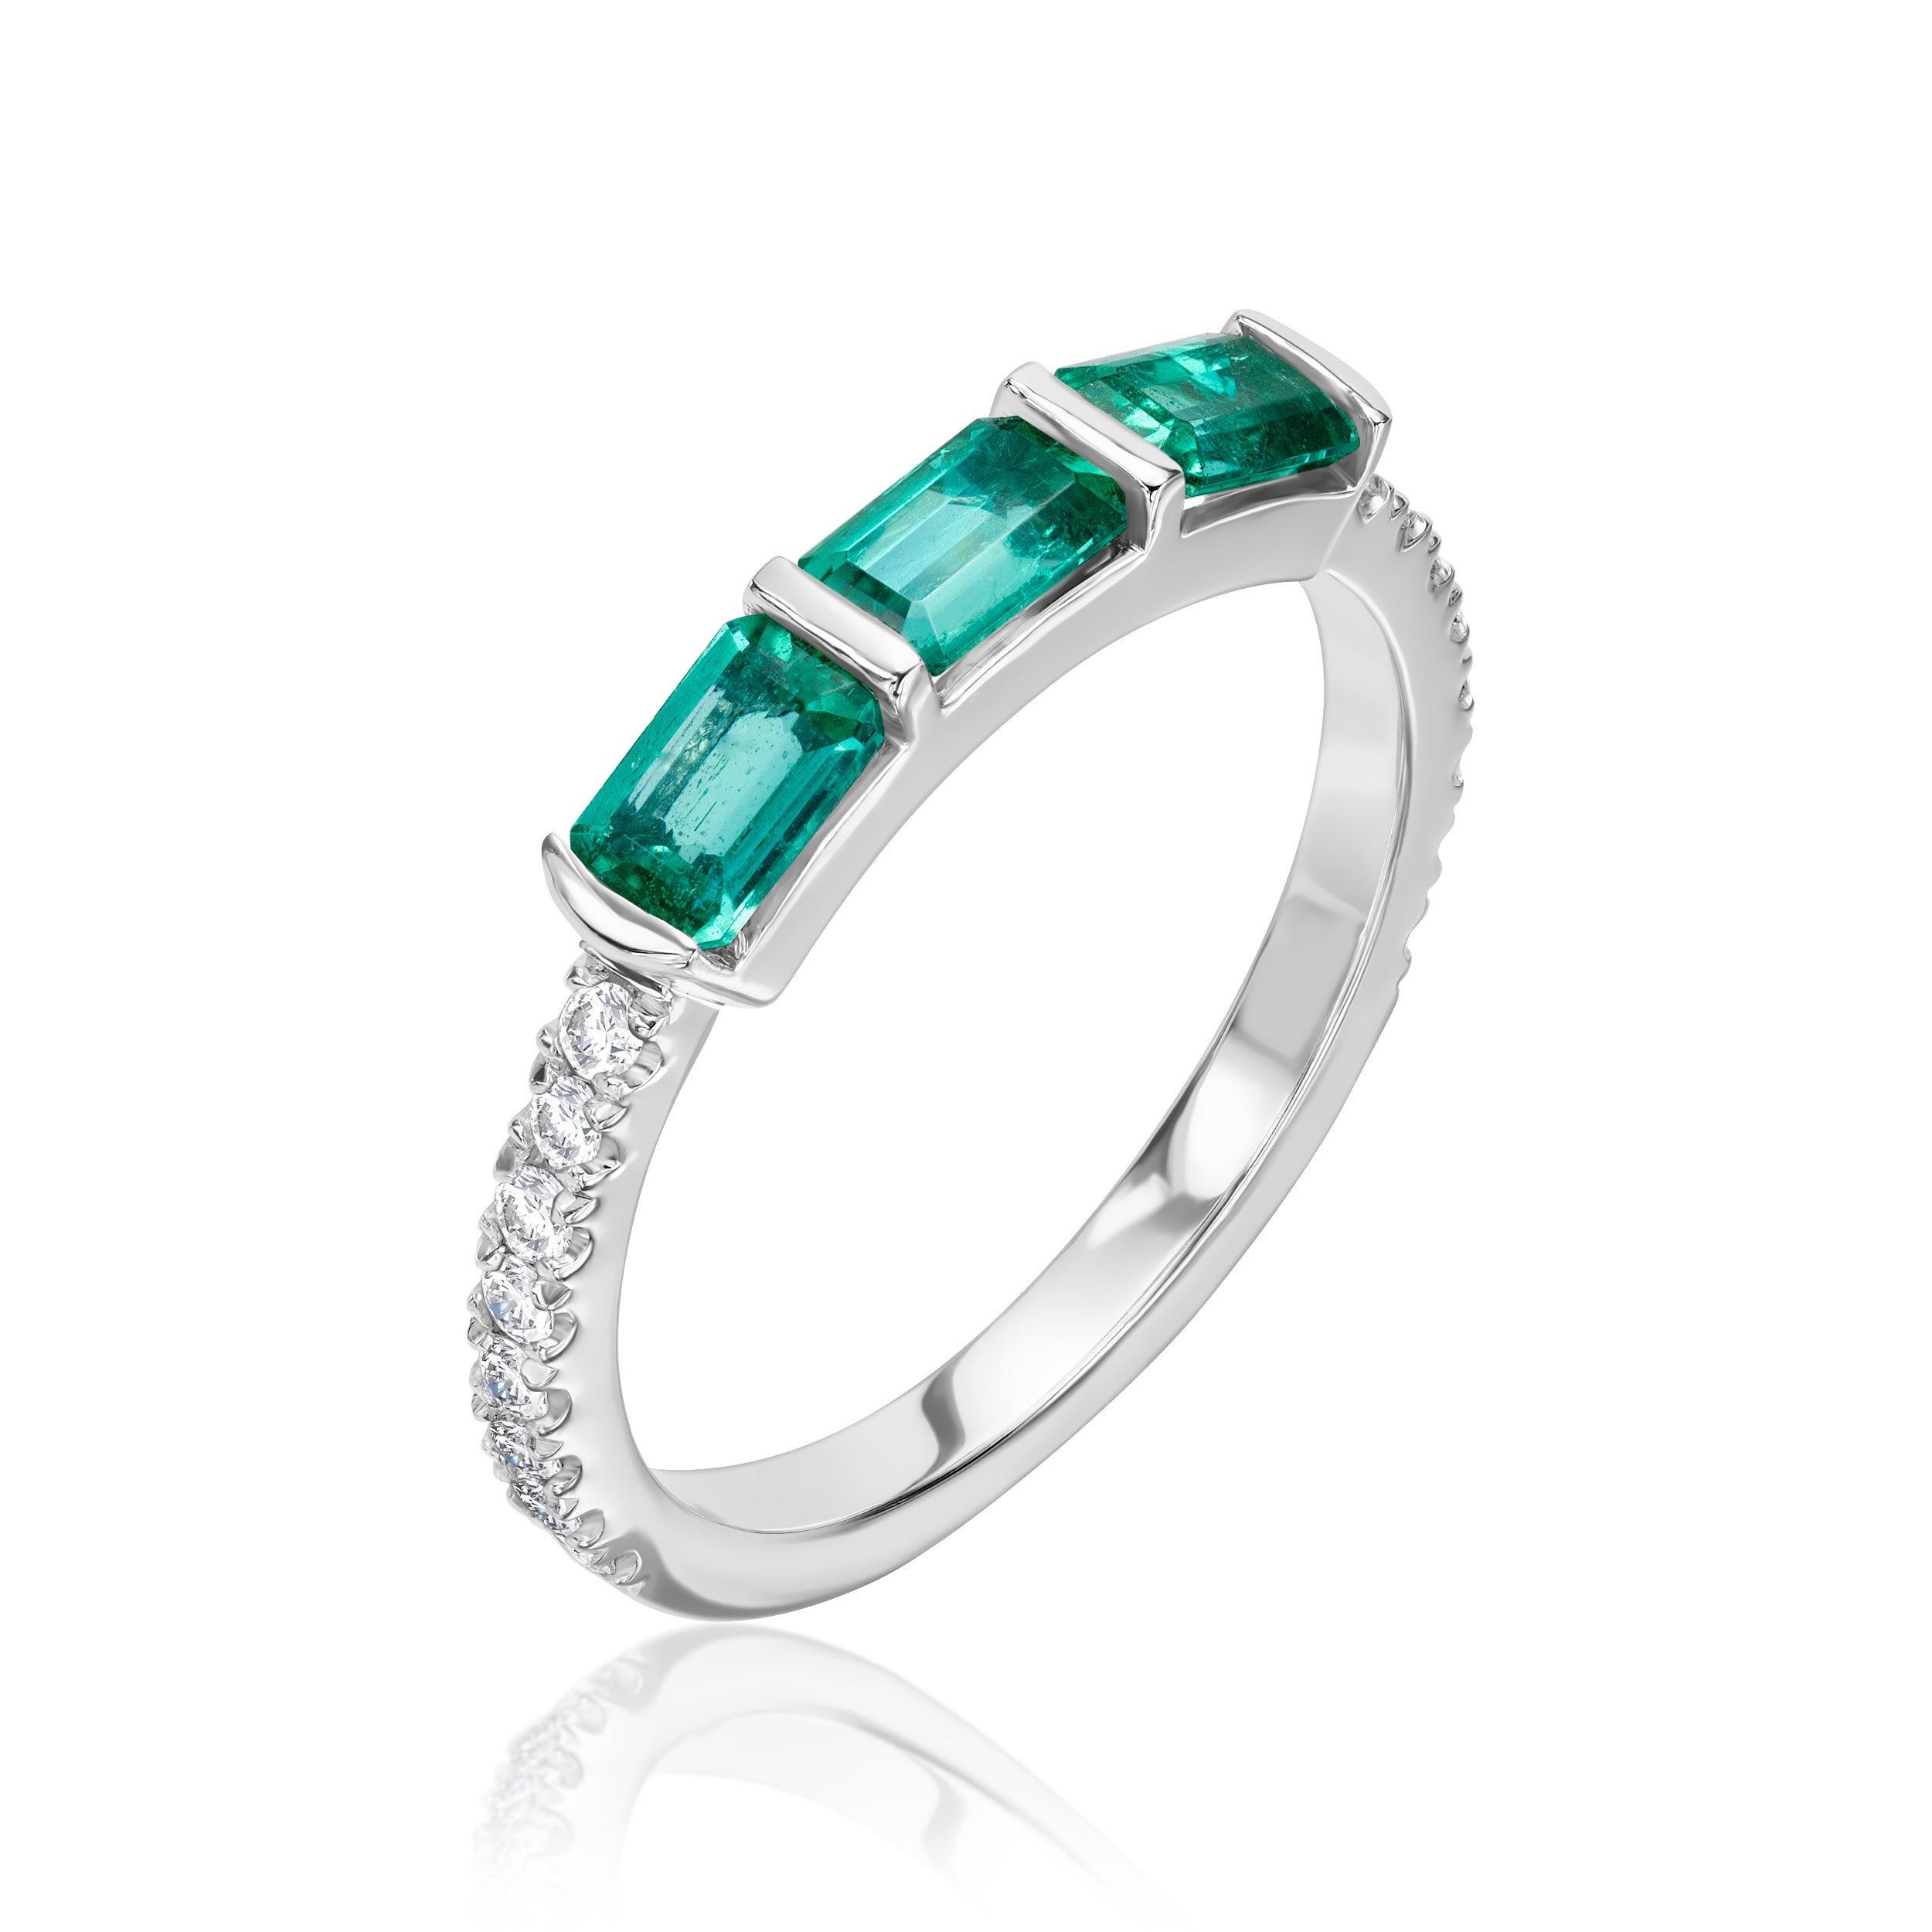 3 Emerald East-West Ring - 1.09ct TW